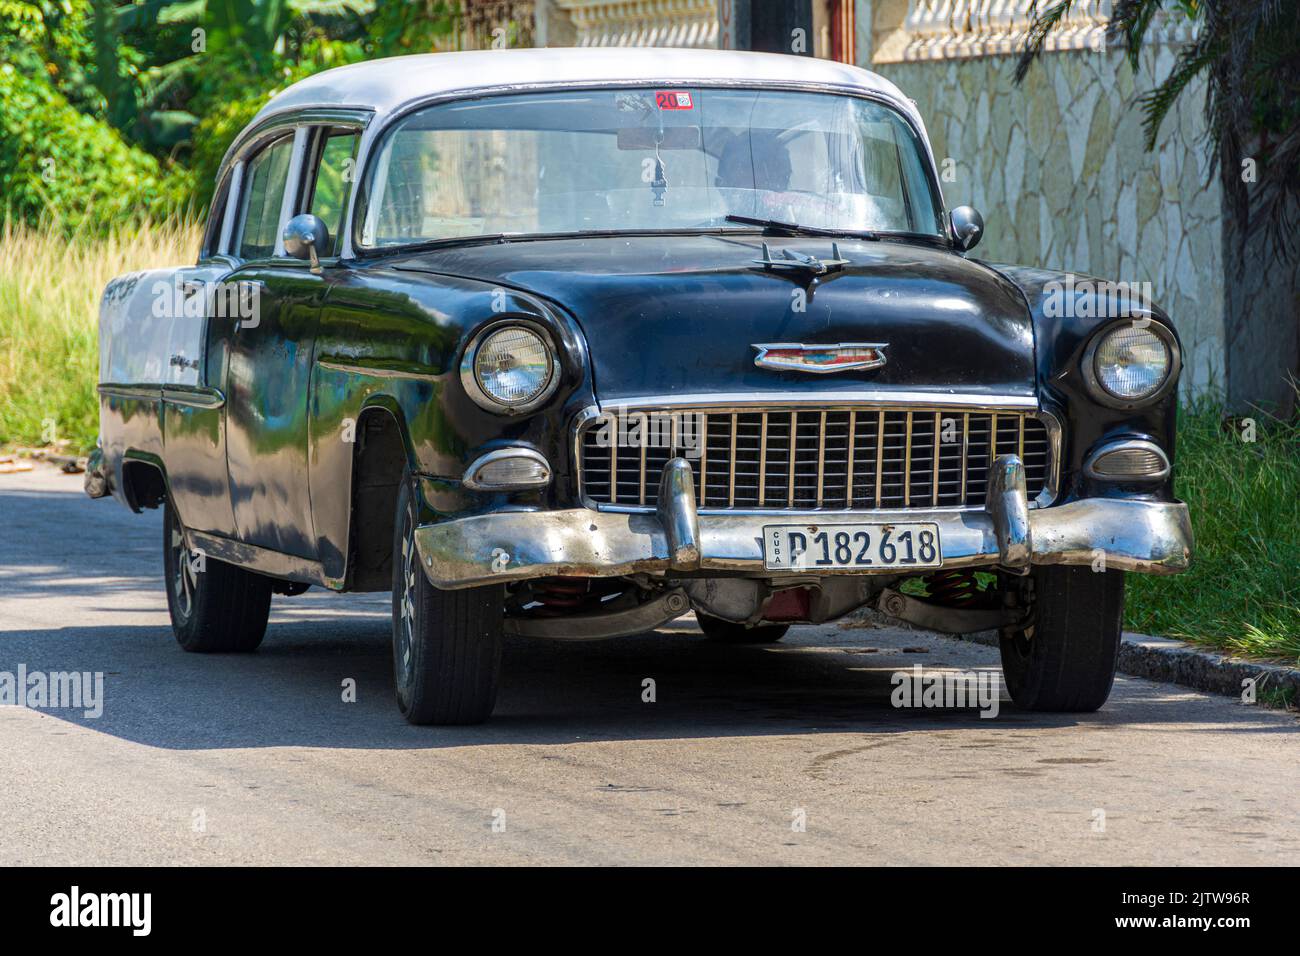 A black and white, vintage car from the 1950's, Havana, Cuba. Stock Photo